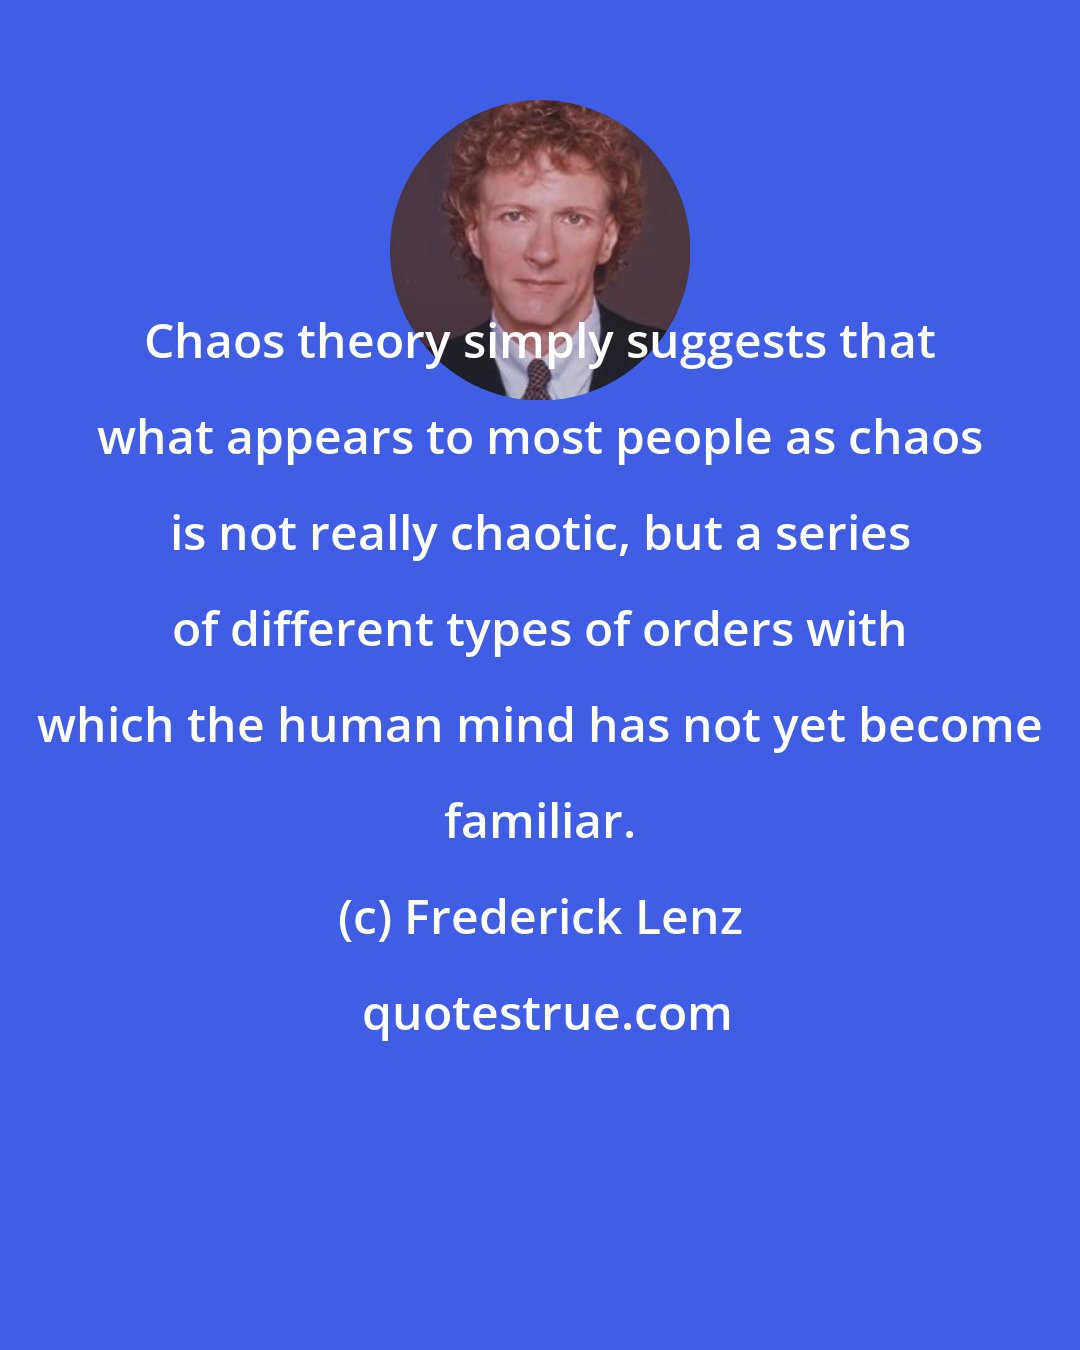 Frederick Lenz: Chaos theory simply suggests that what appears to most people as chaos is not really chaotic, but a series of different types of orders with which the human mind has not yet become familiar.